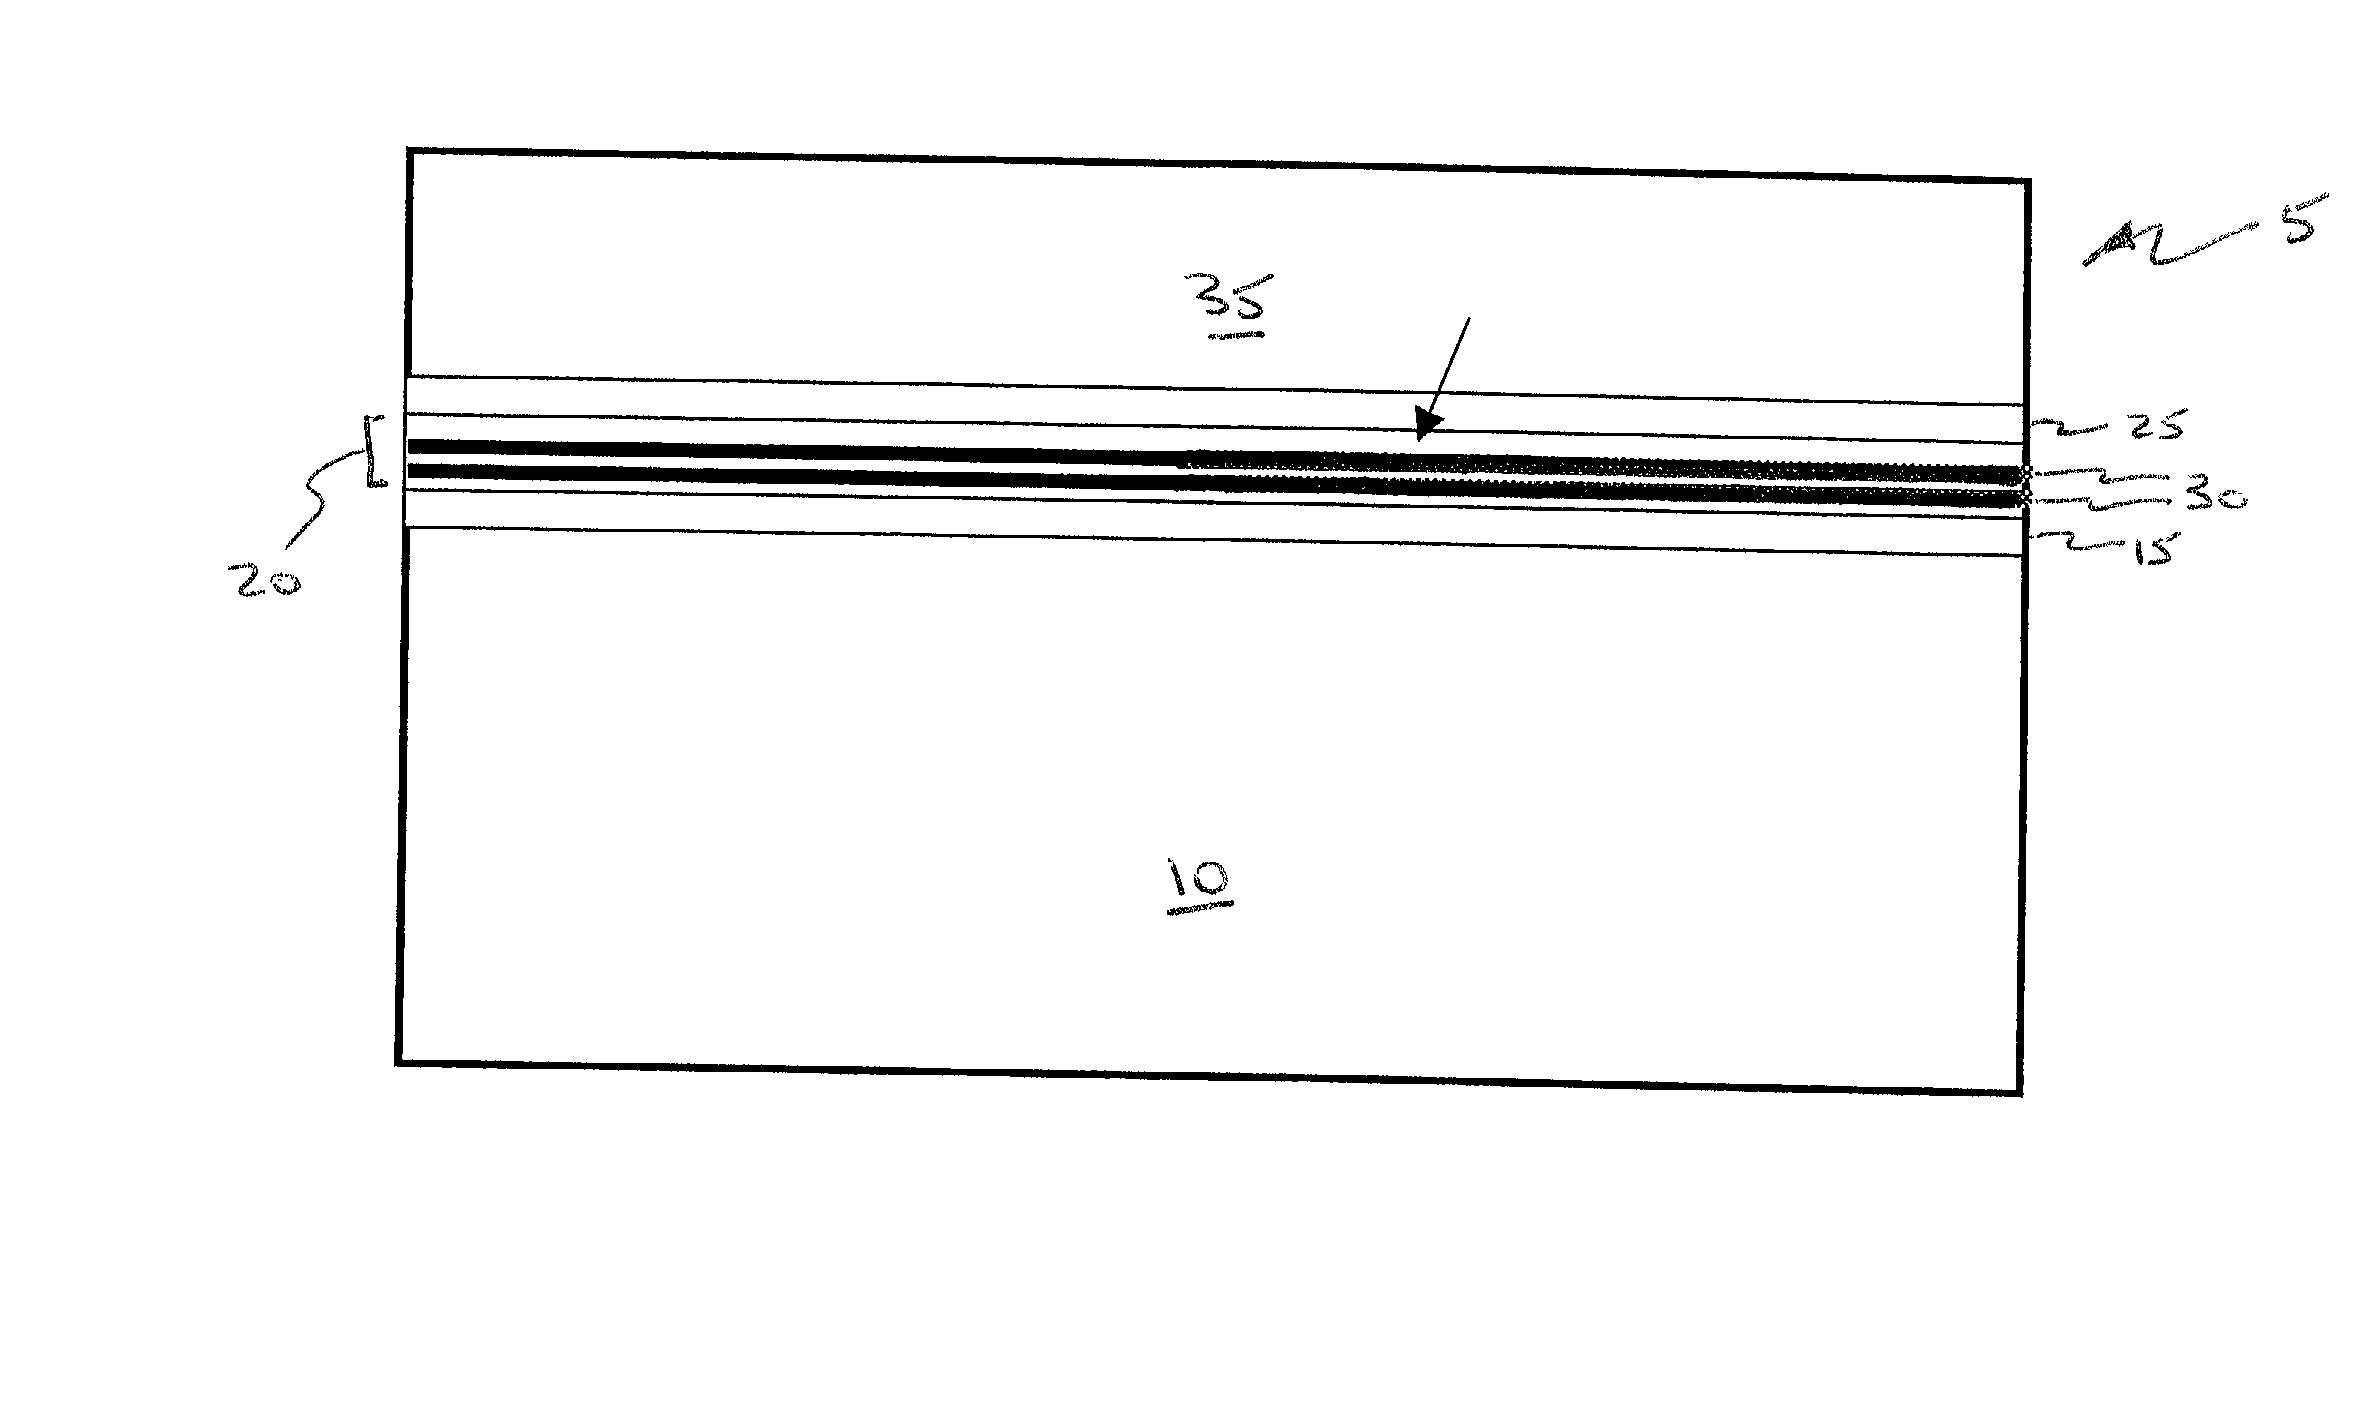 Method of manufacturing optical devices and related improvements